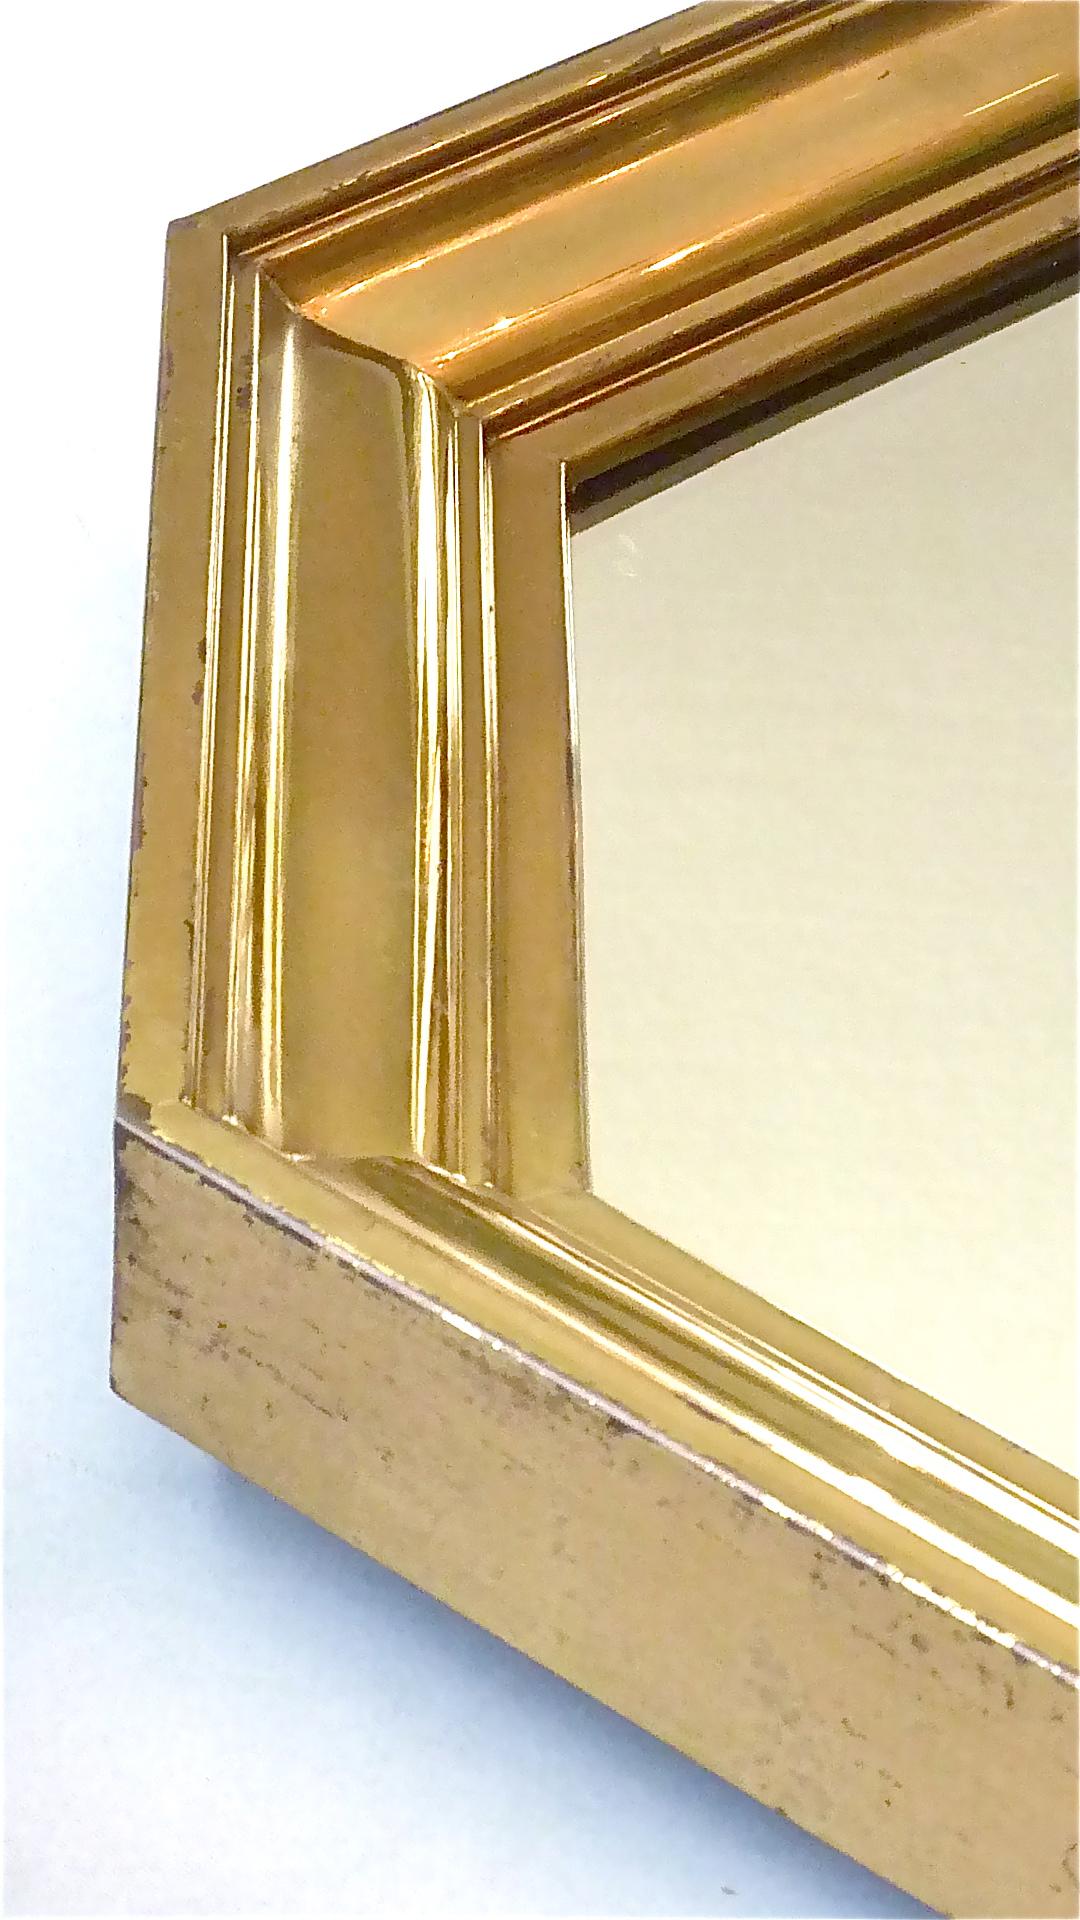 Large Maison Jansen Octagonal Patinated Brass Mirror Crespi Rizzo Style, 1970s For Sale 2